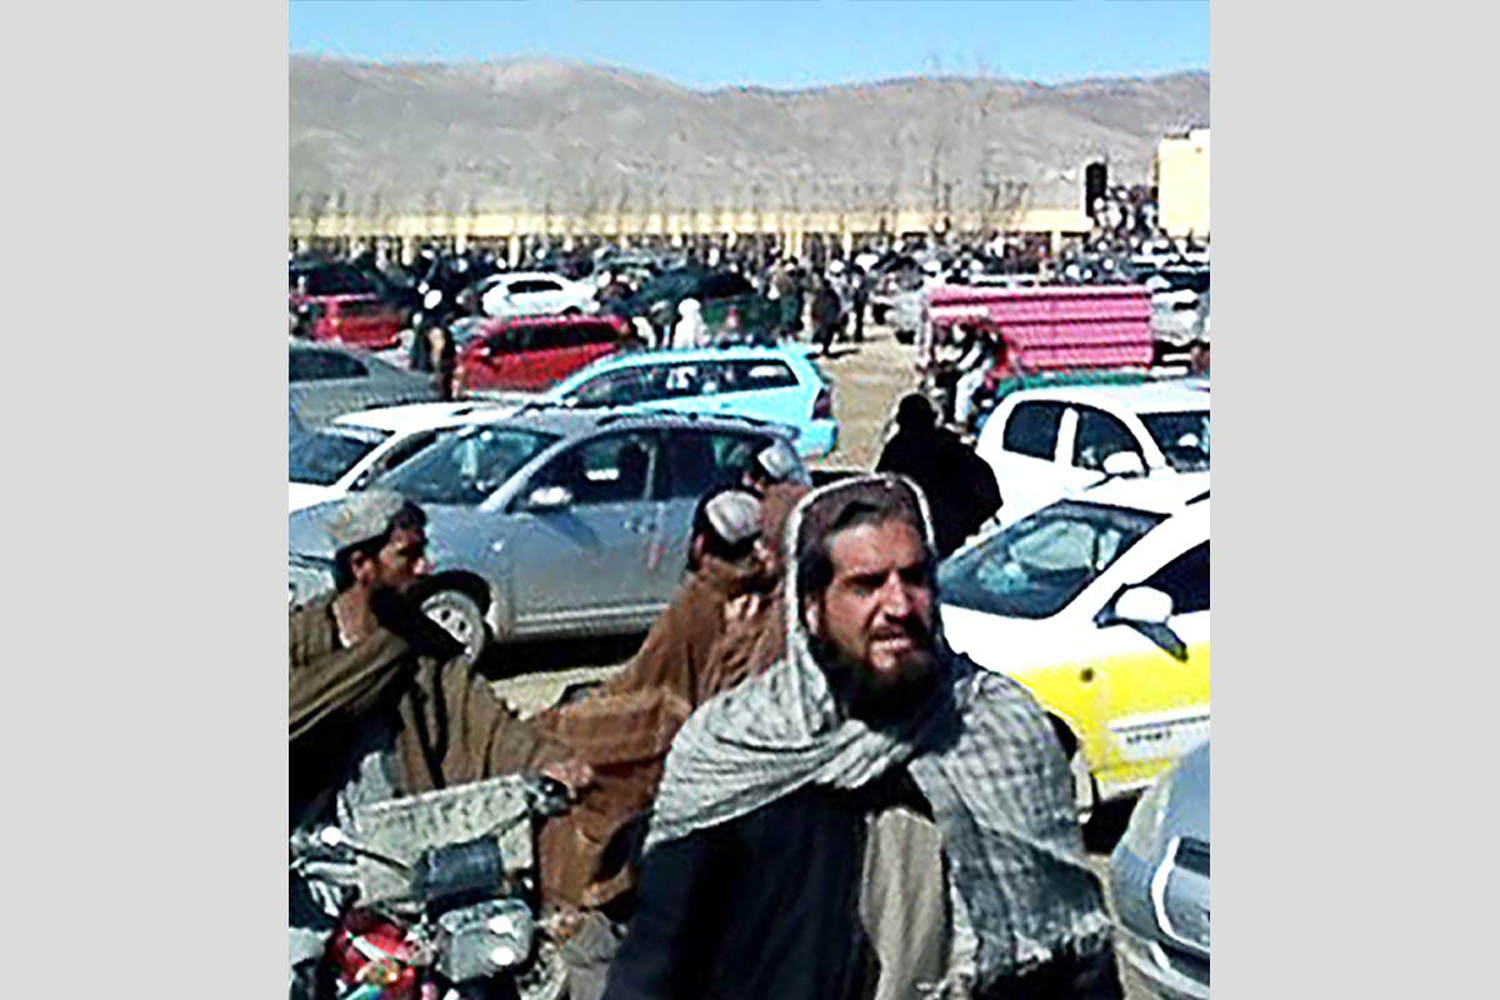 Taliban carry out a double public execution at a stadium in Afghanistan